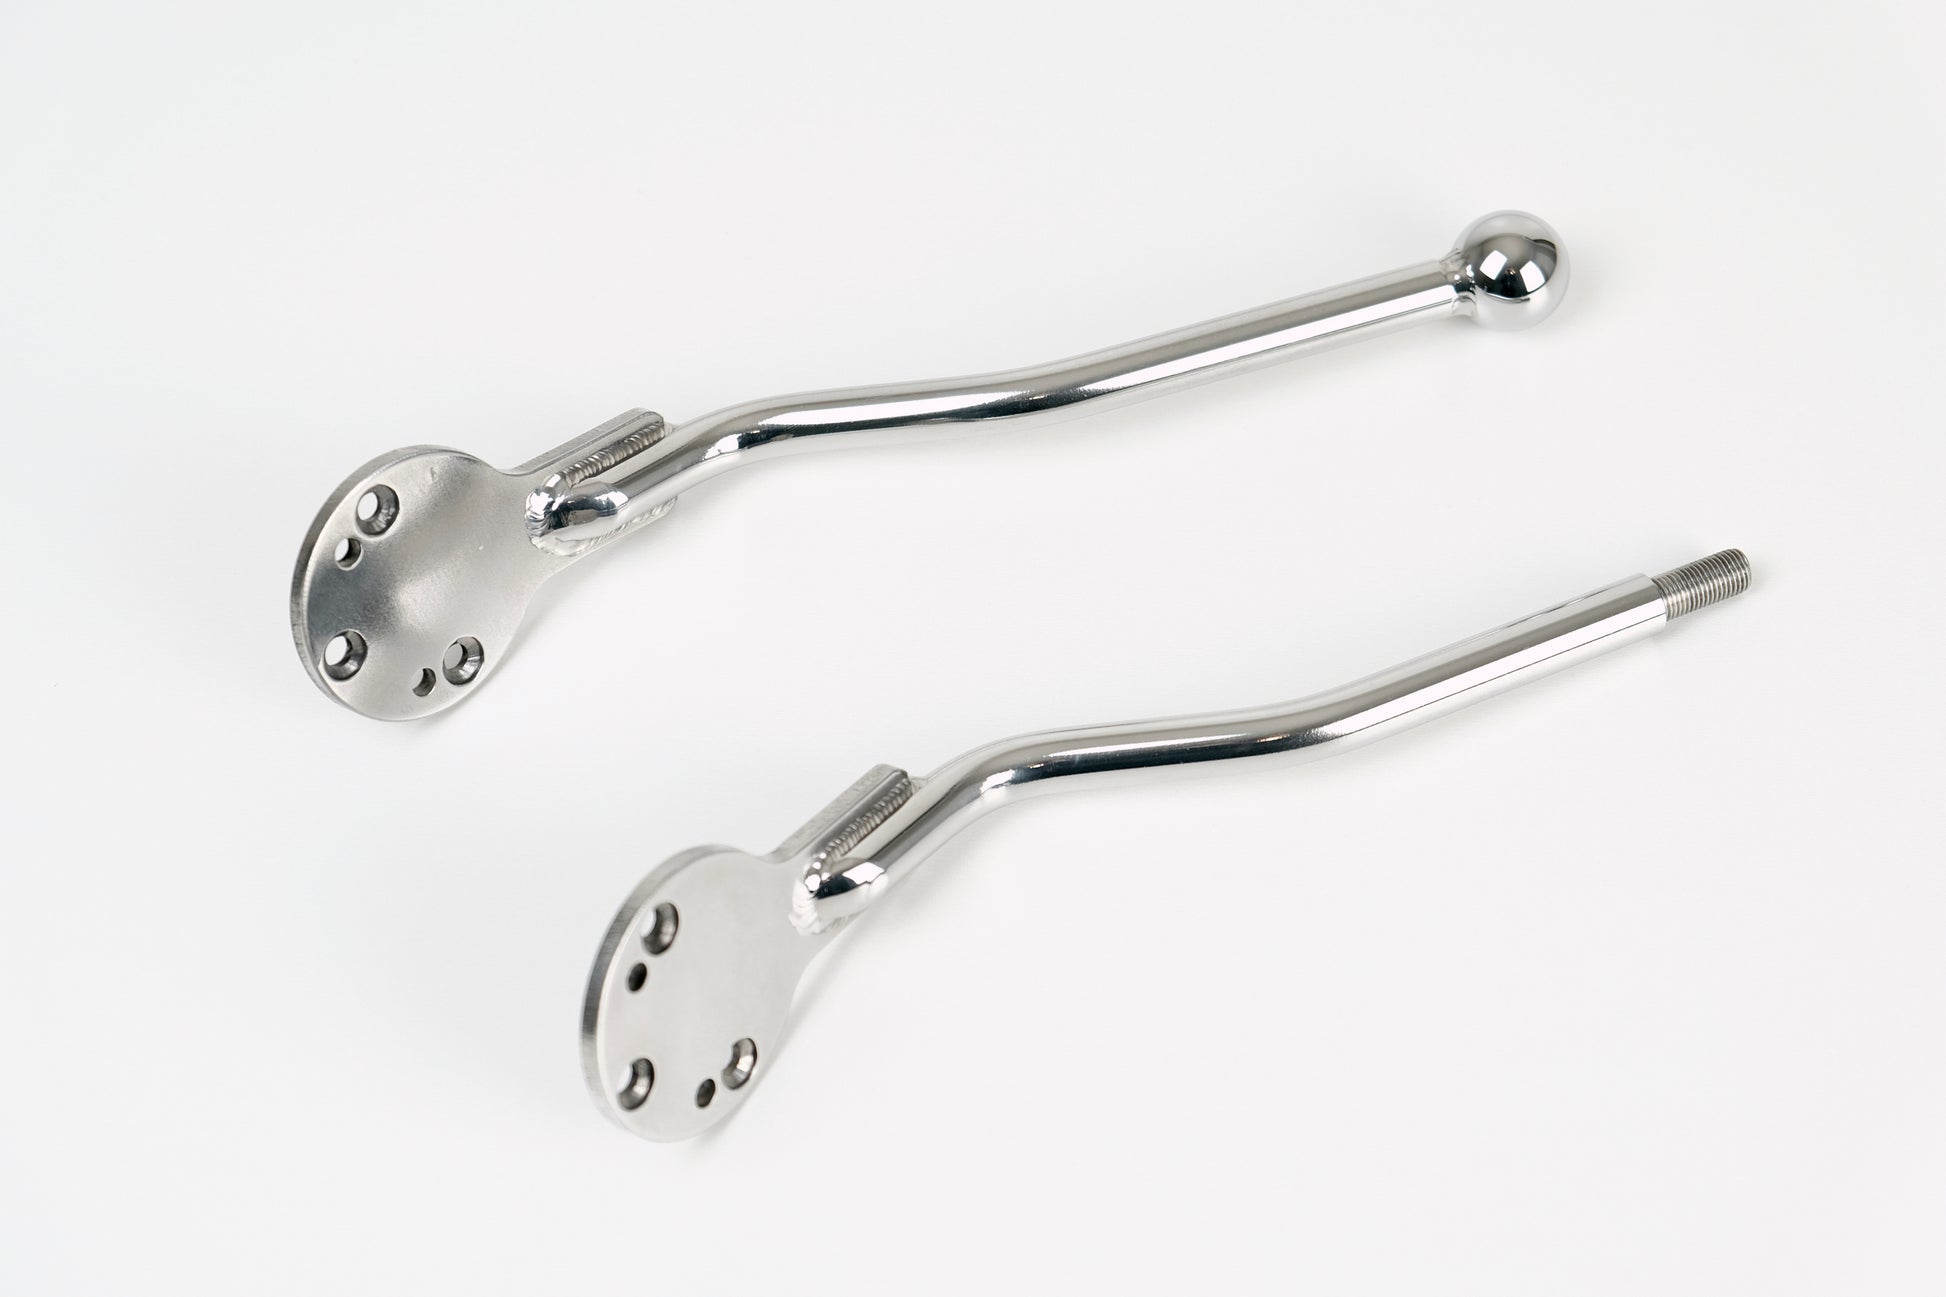 two Stainless edward richie jockey shifters one with a stud and one with a ball top